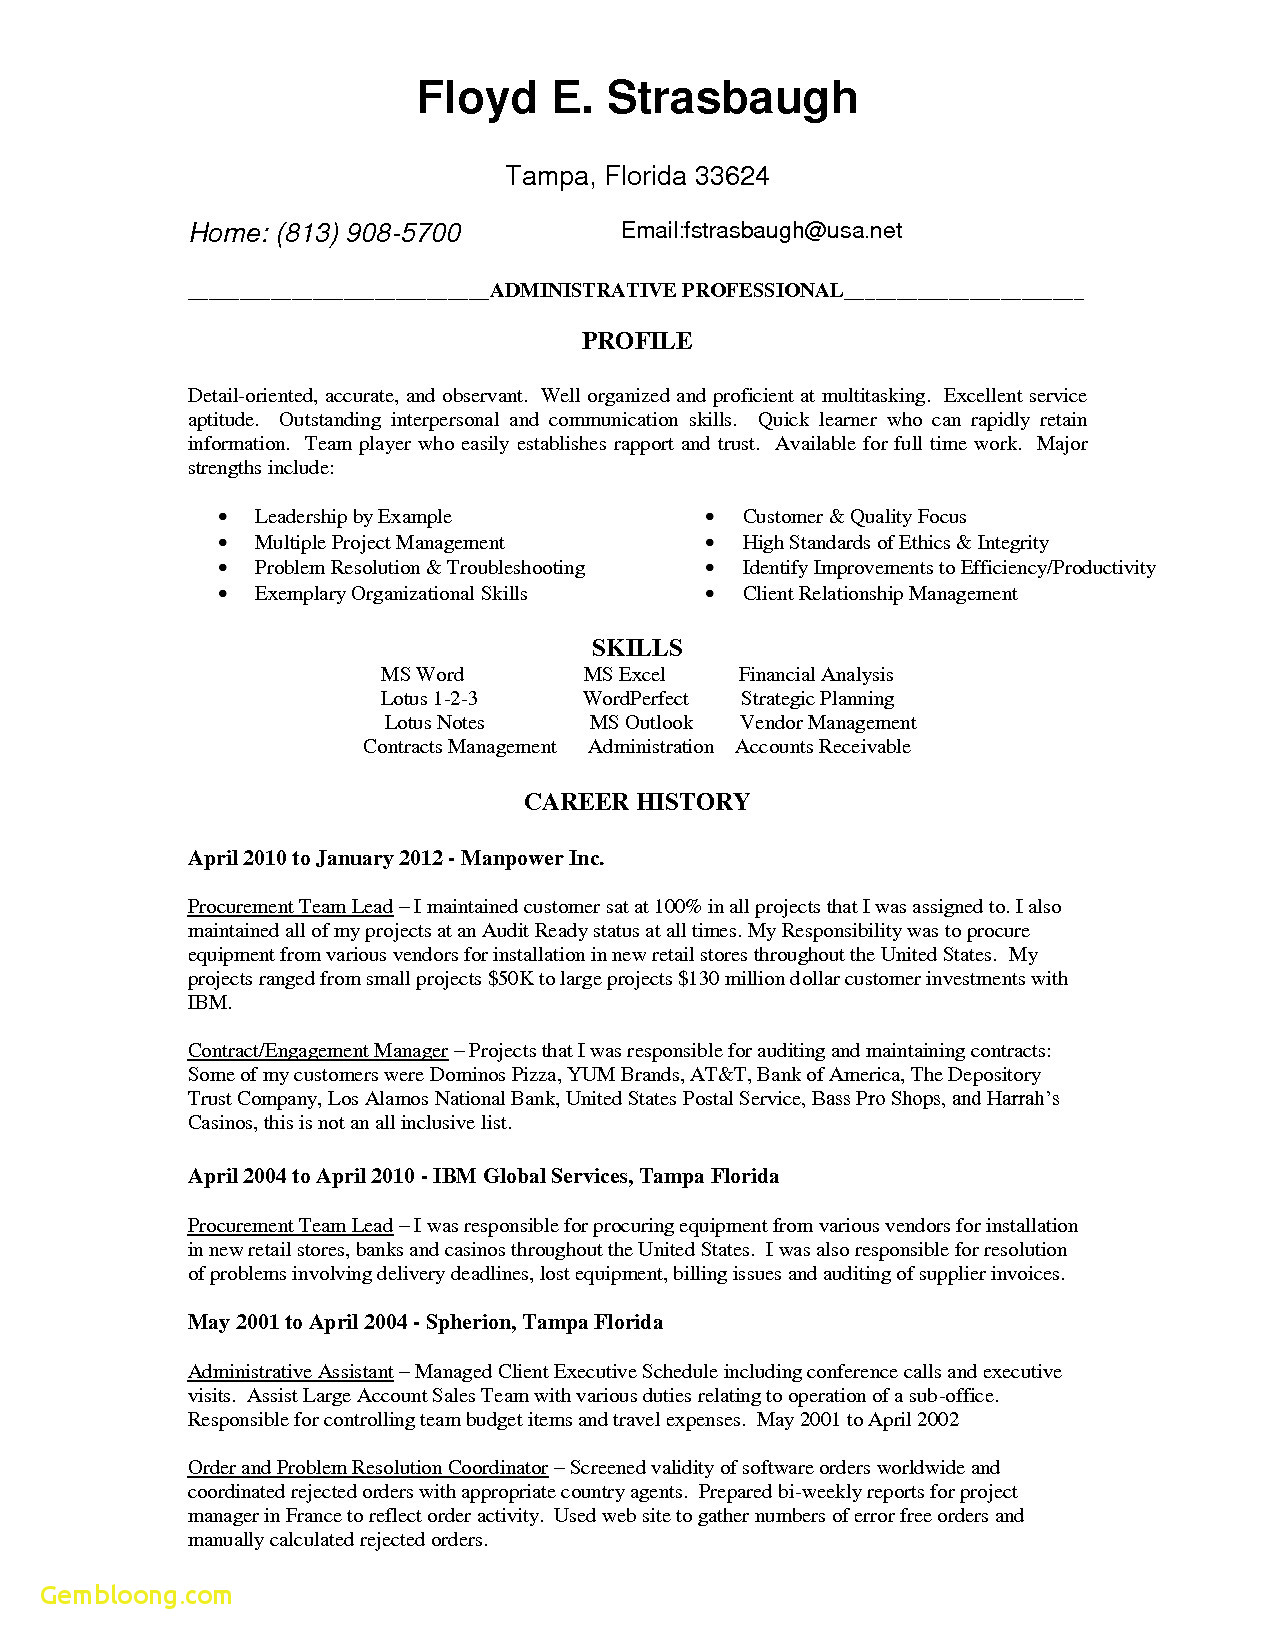 Resume and Cover Letter Template Microsoft Word - Free Professional Resume Templates Microsoft Word Download English